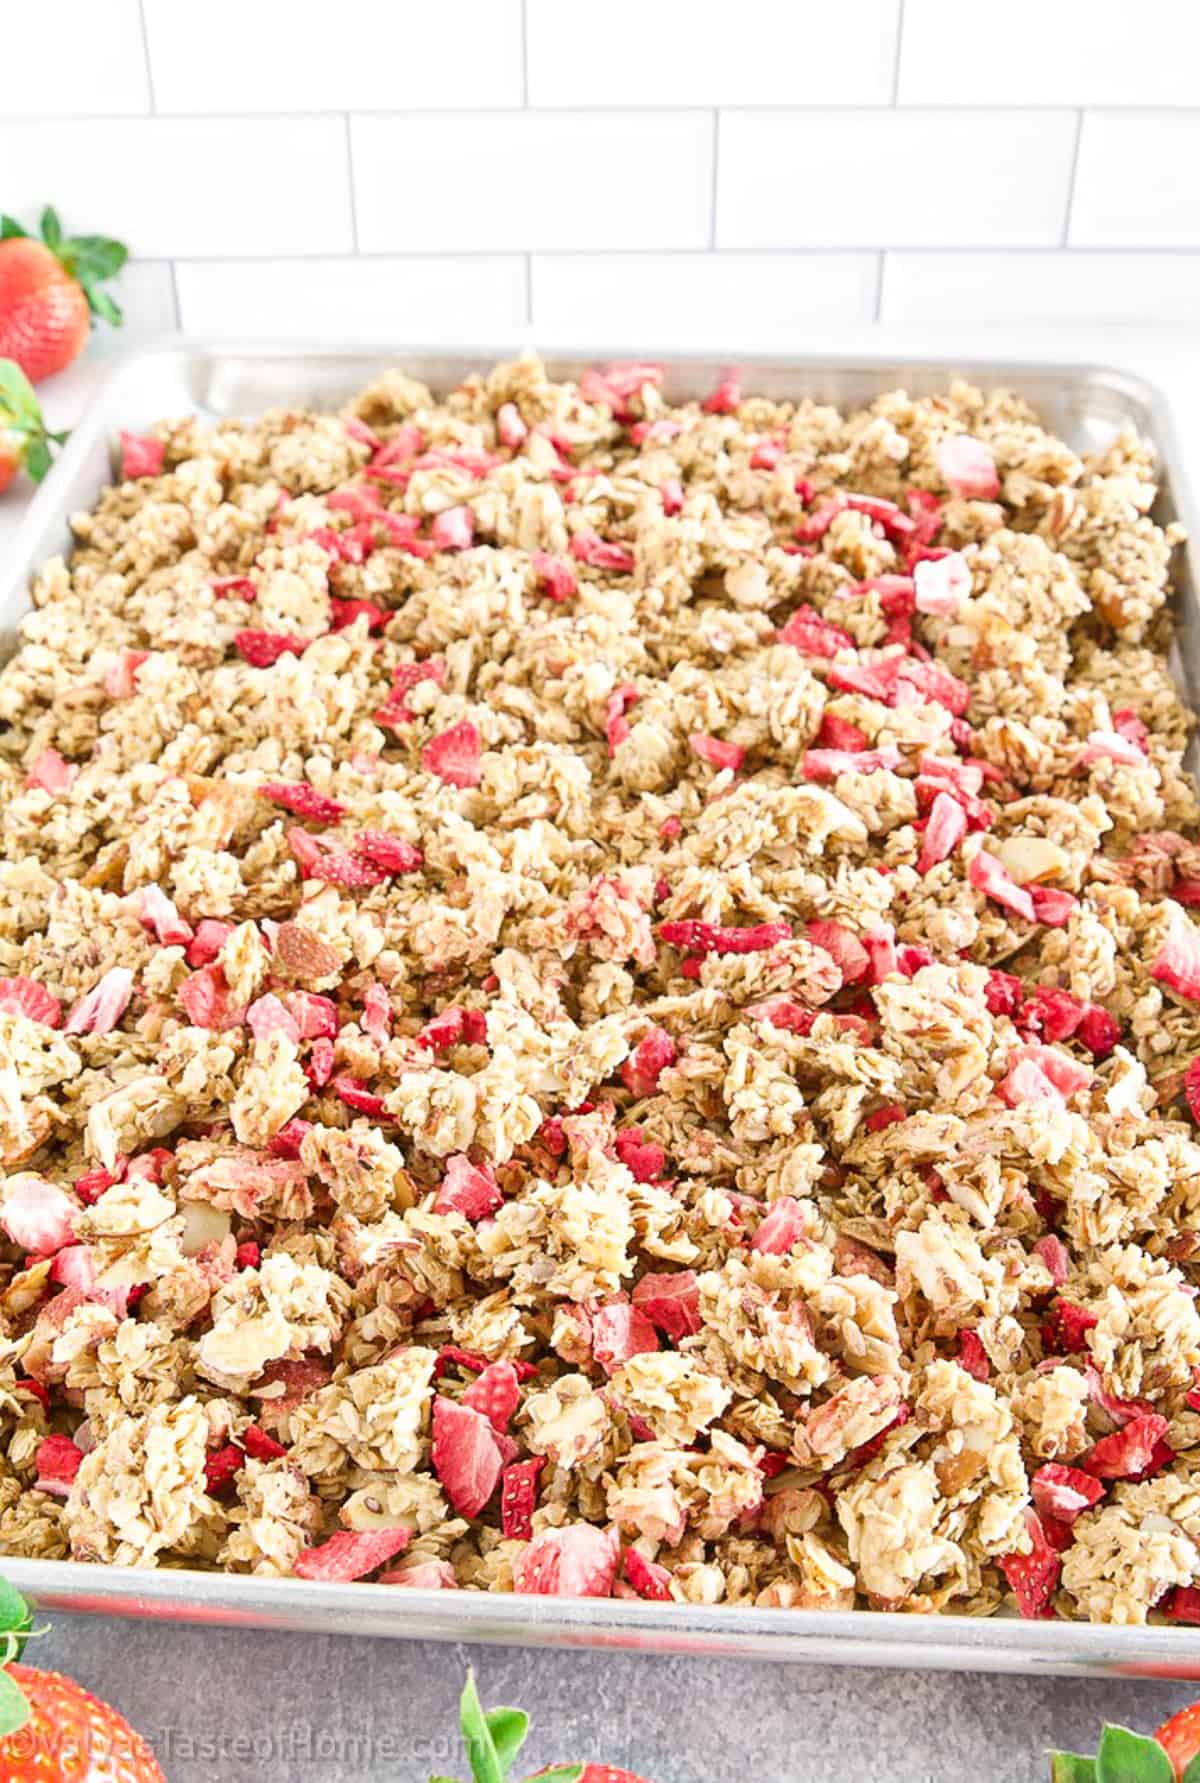 Granola is a type of breakfast cereal made from rolled oats, nuts, and other ingredients like dried fruit or seeds. It is usually sweetened with honey or sugar and baked until it becomes crunchy.